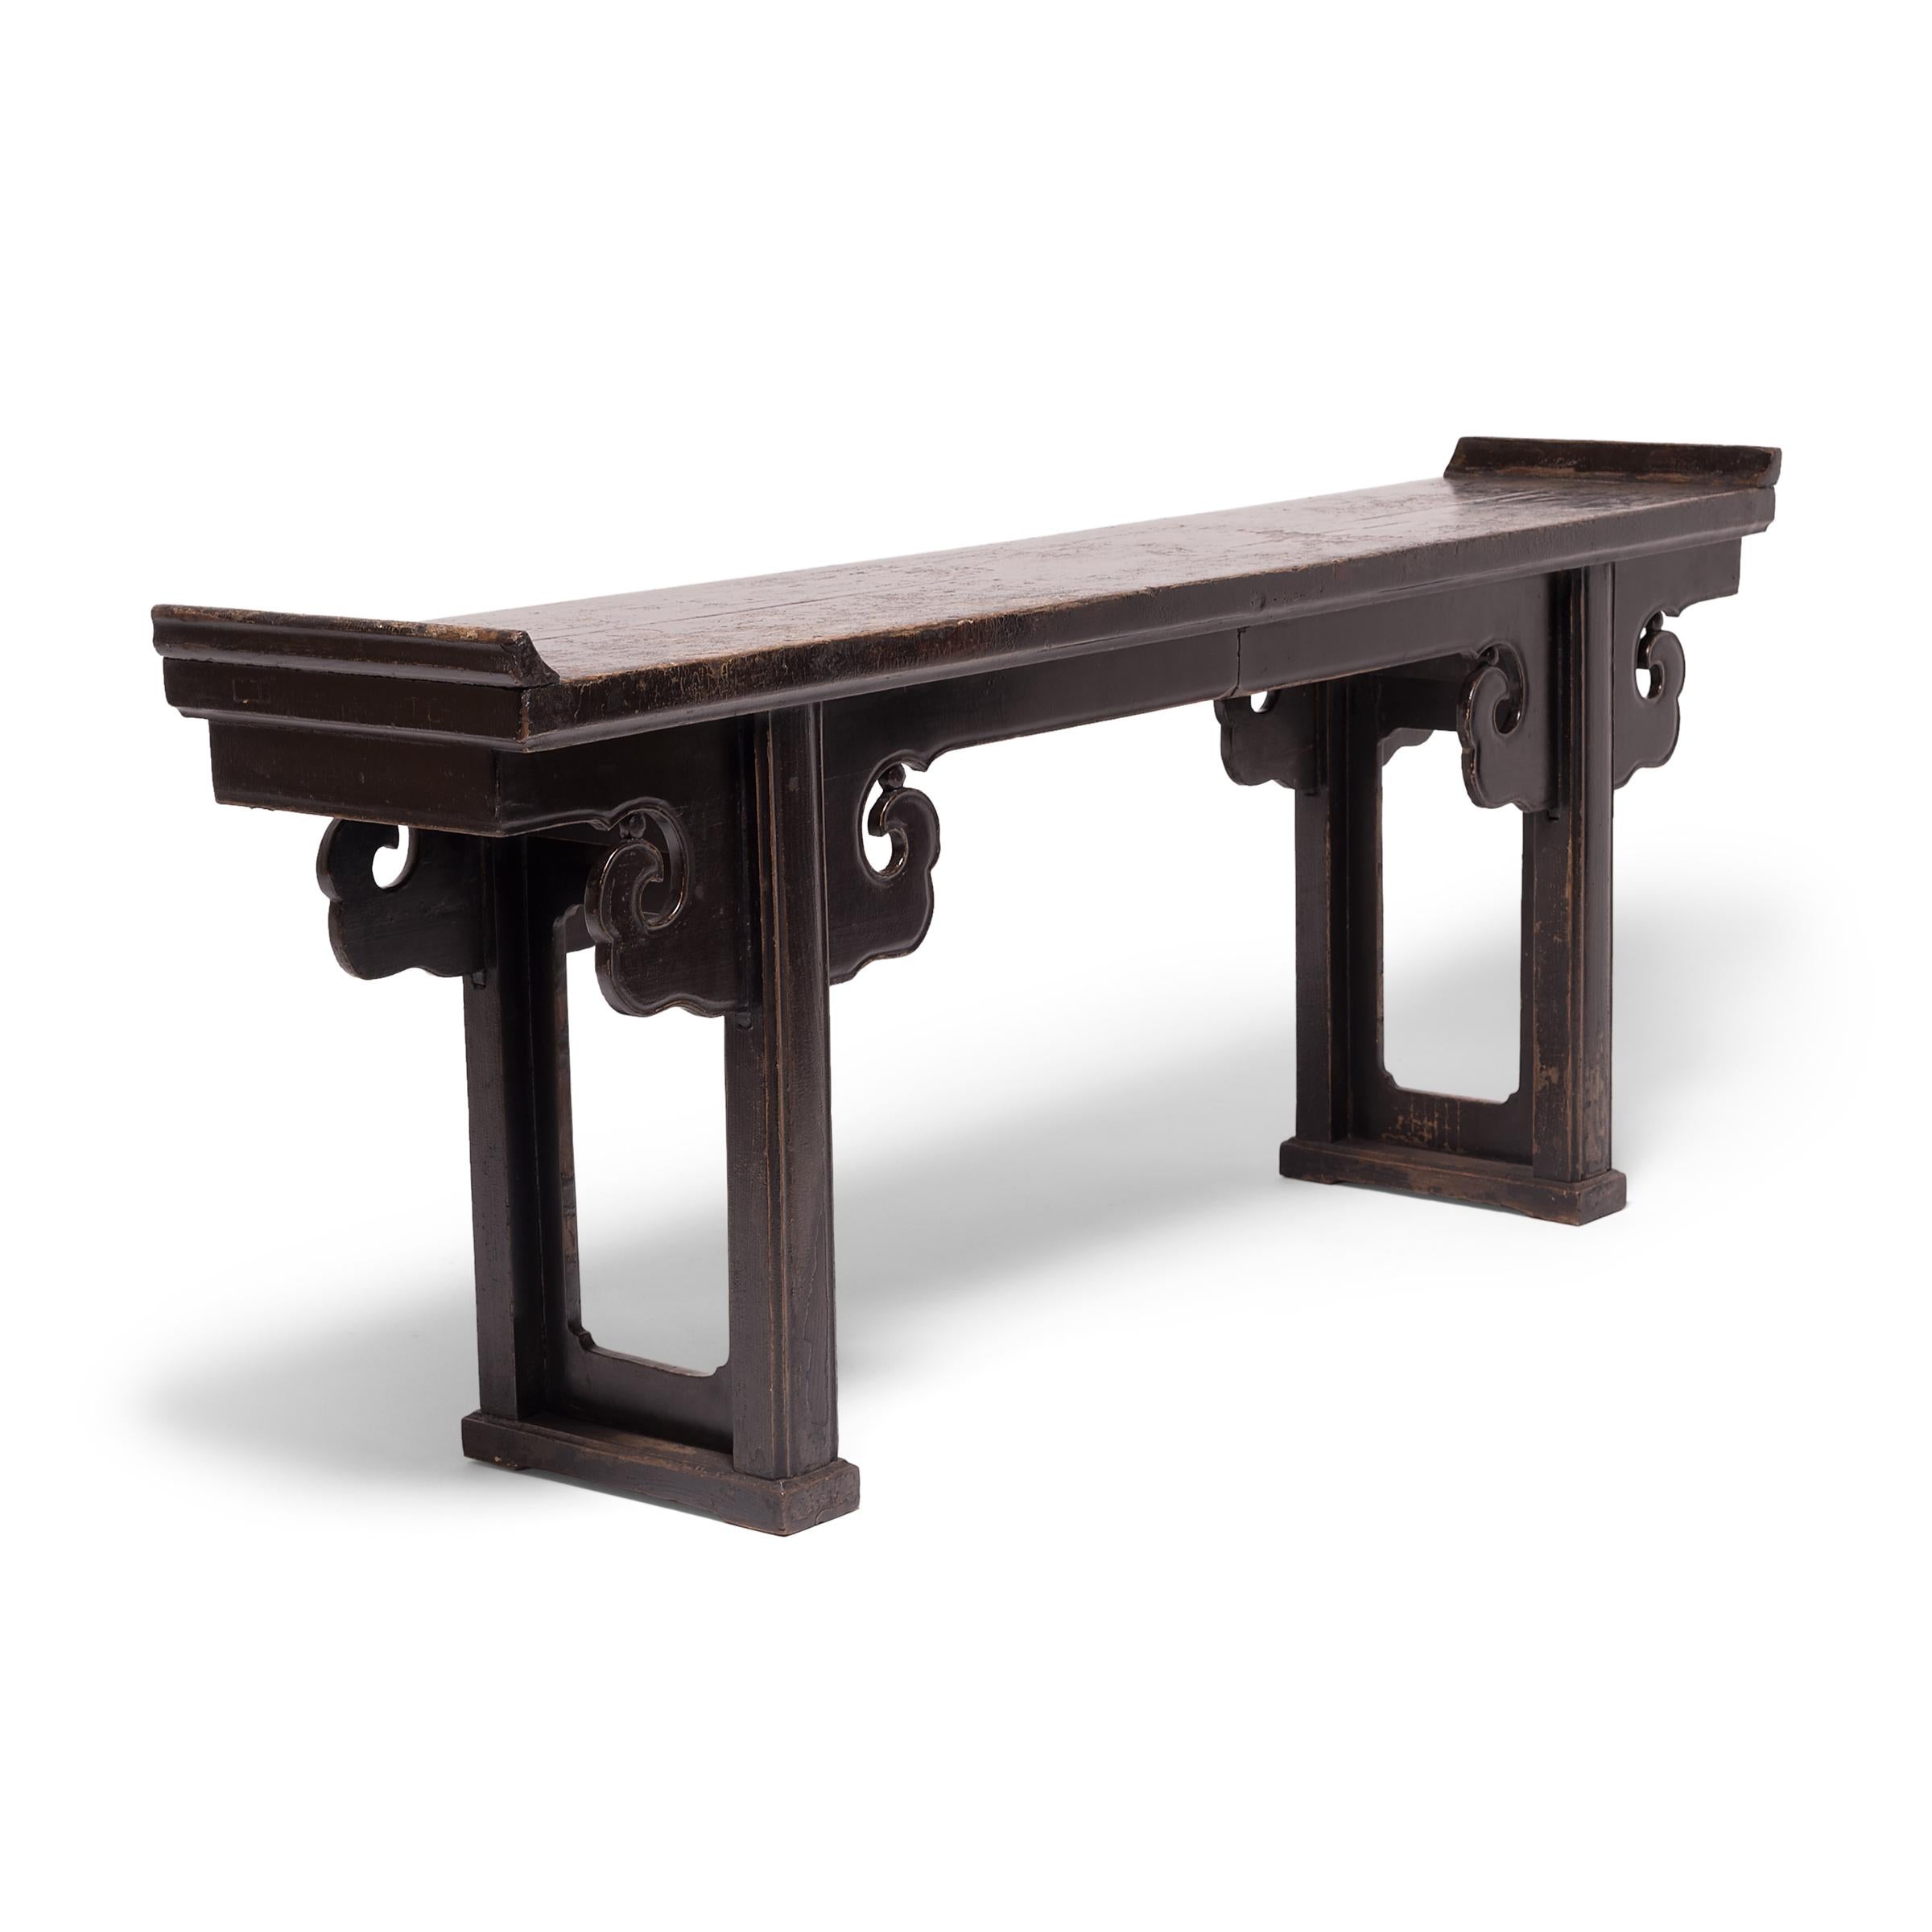 Chinese Console Table with Cloud Spandrels